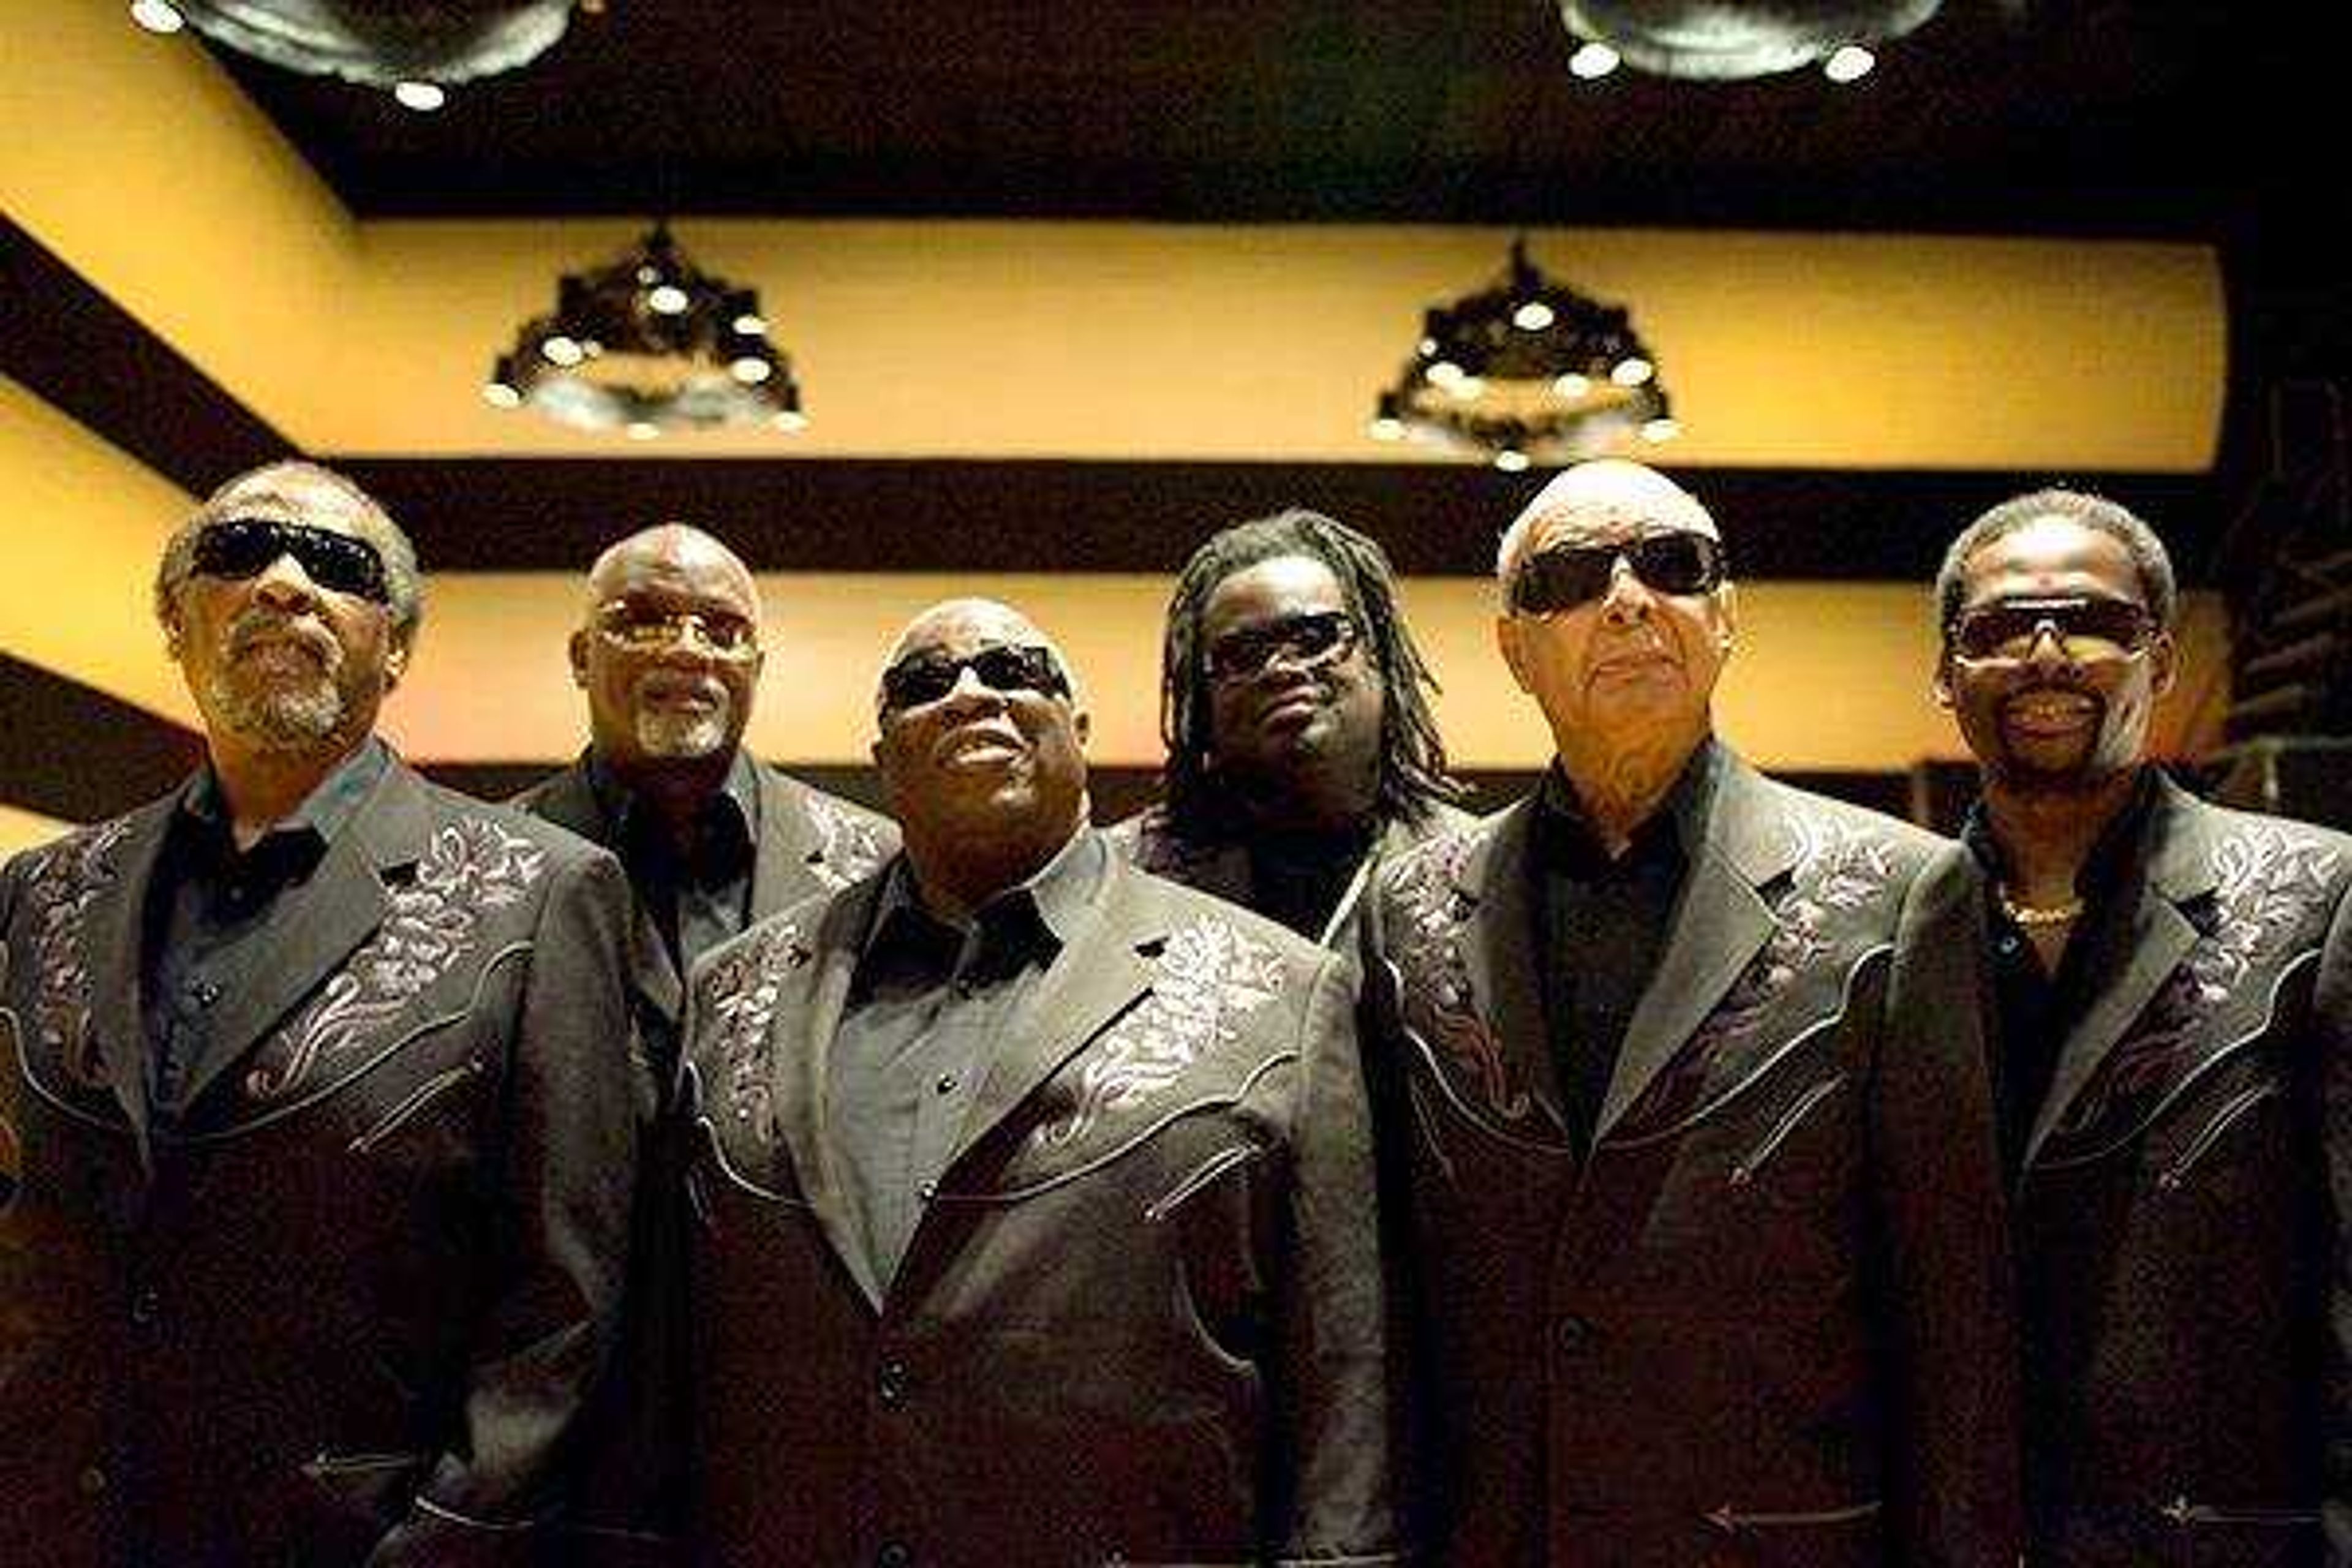 Grammy winners Dr. John and the Blind Boys of Alabama will perform at 7:30 p.m. Oct 18 at the Bedell Performance Hall. The two acts decided to tour together to recreate a concept that originated in the 1930s, when a series of concerts called Spirituals and Swing were at Carnegie Hall. Submitted photo